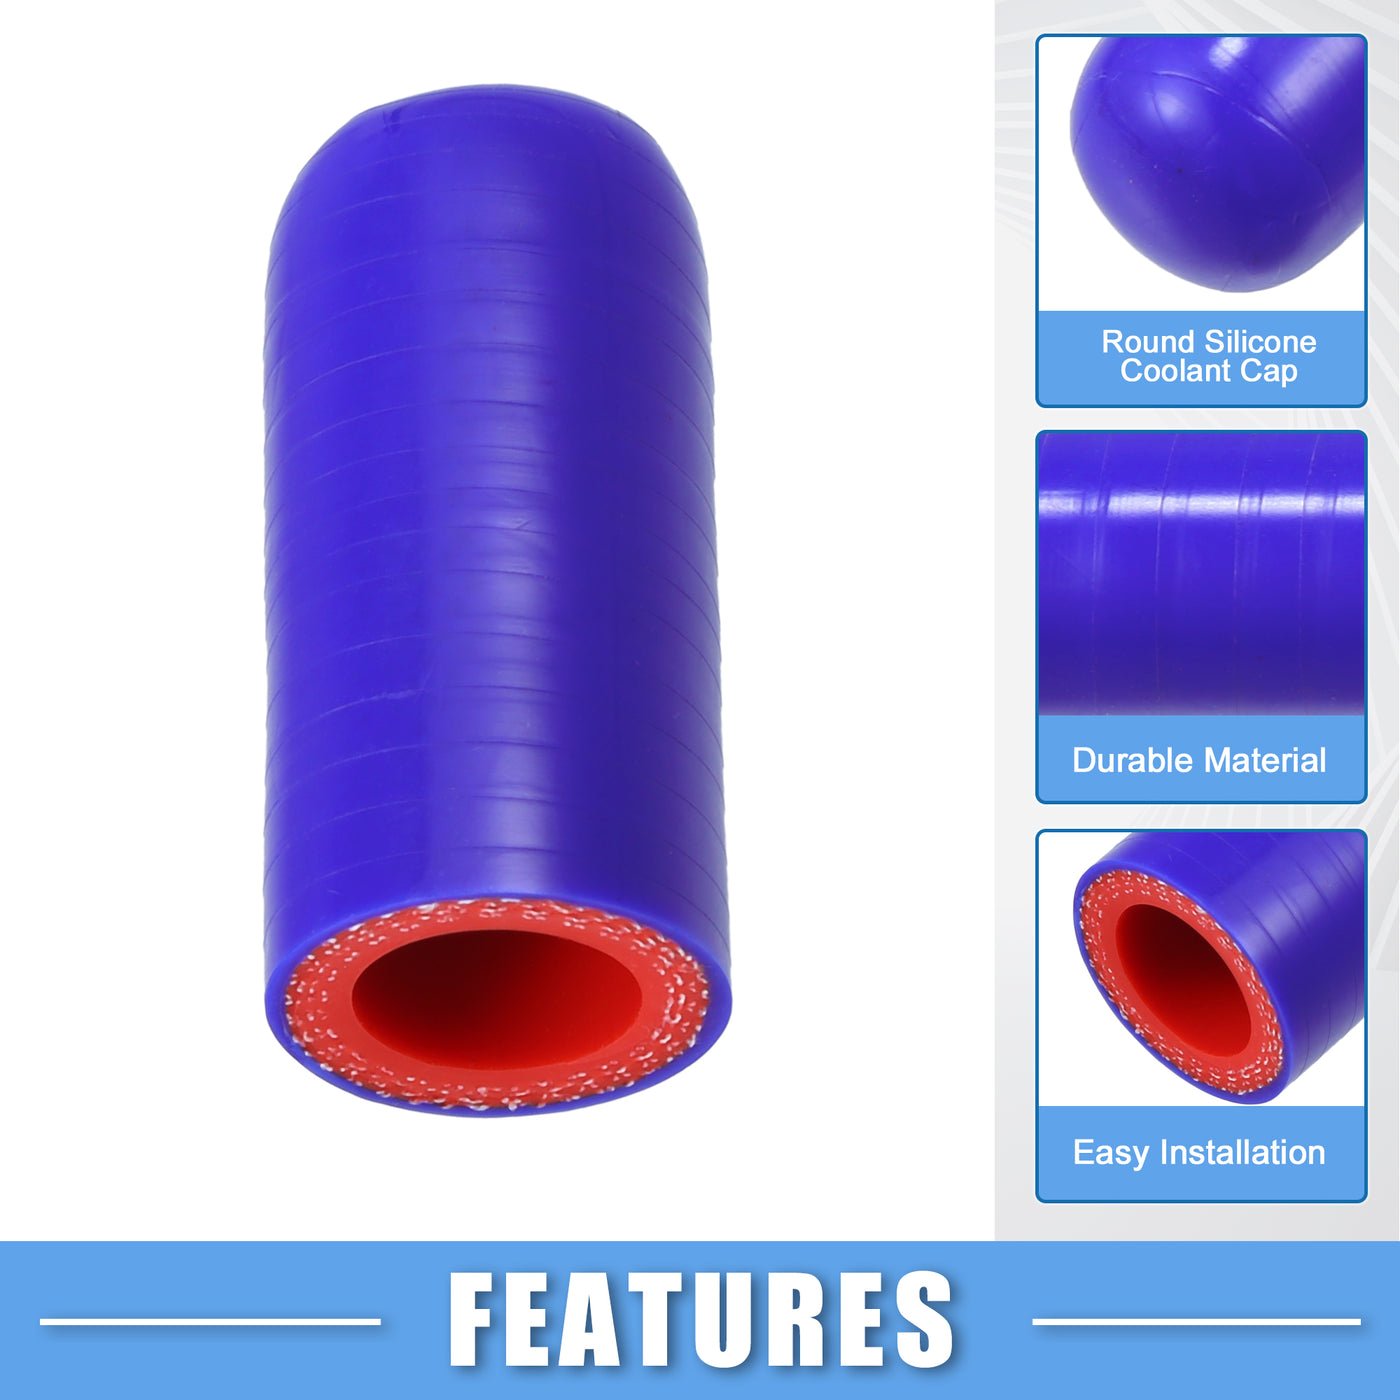 A ABSOPRO Universal Silicone Coolant Cap Intake Vacuum Hose End Plug 18mm 0.71" ID Car Coolant Heater Bypass Vacuum Water Port Silicone Blue